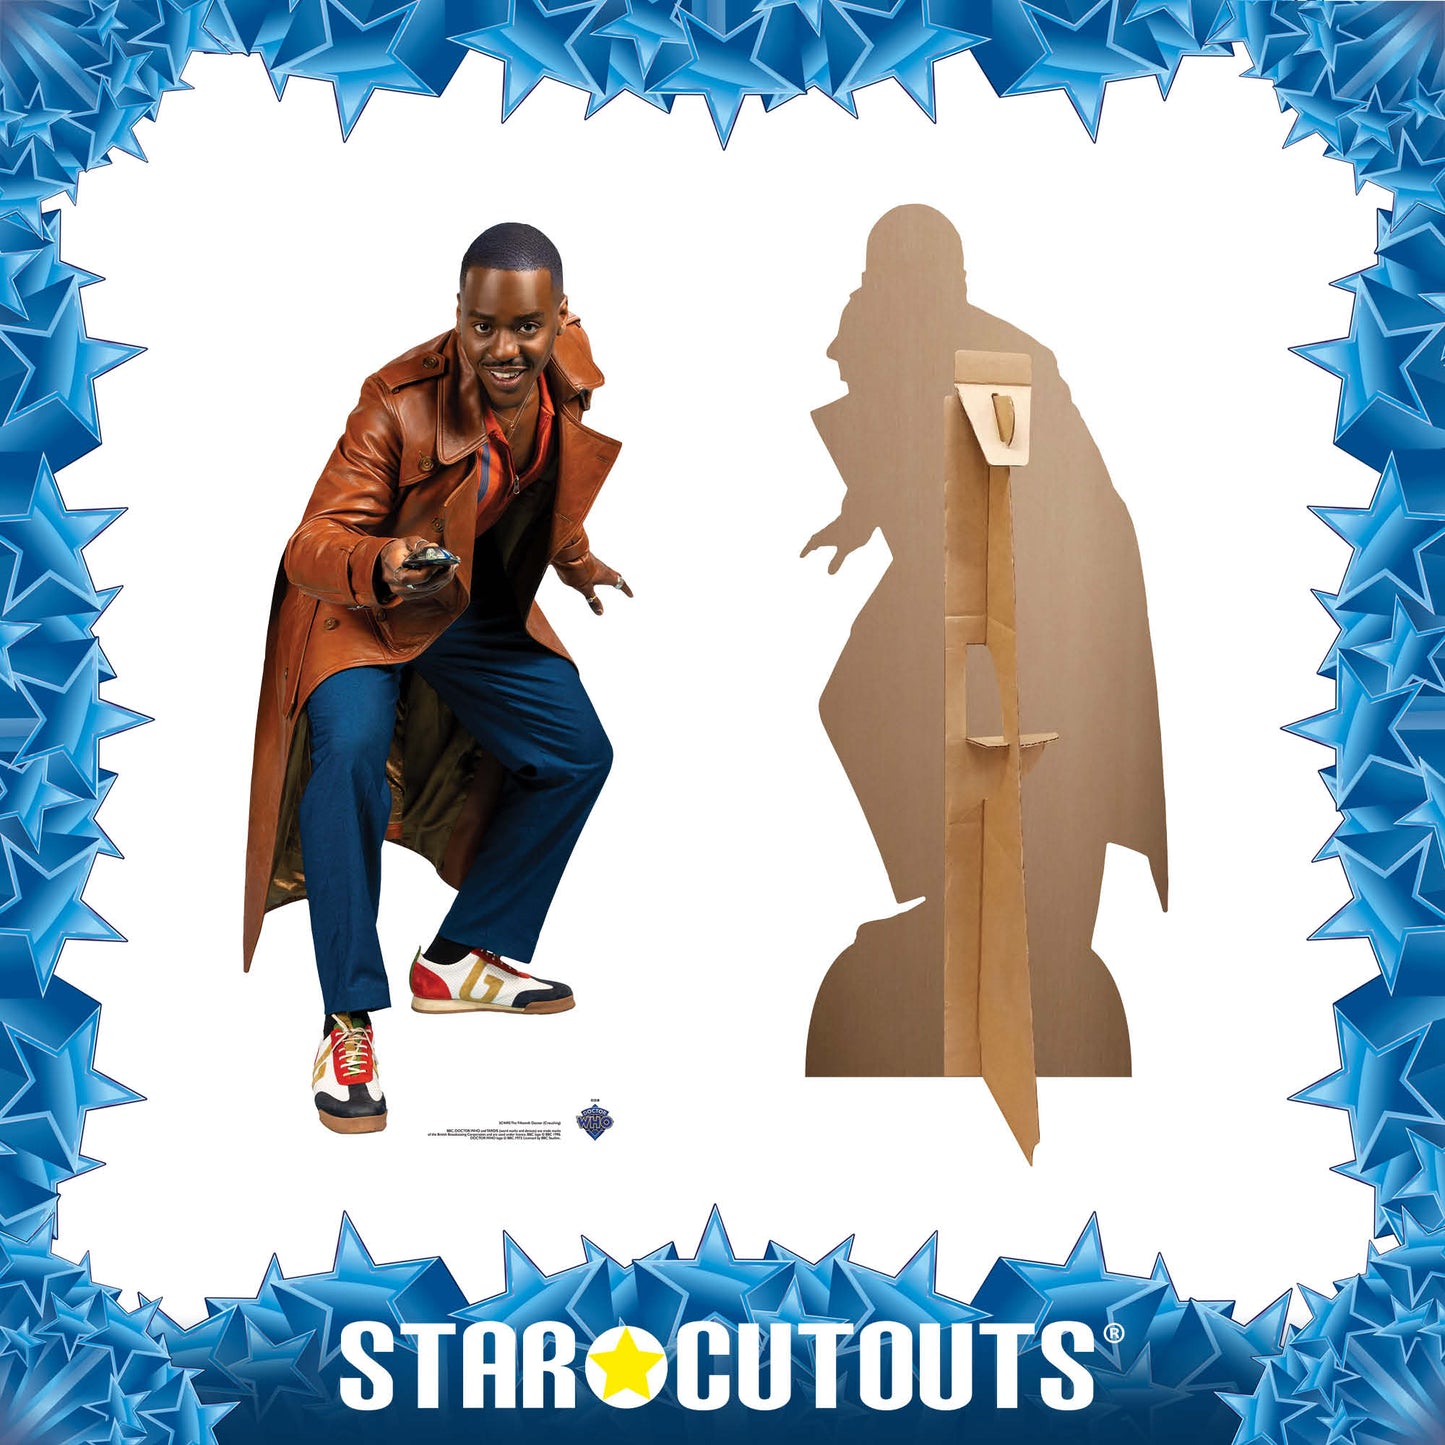 SC4492 Mini Ncuti Gatwa as The Fifteenth Doctor - Doctor Who - Posing with Sonic Screwdriver Cardboard Cut Out Height 91cm